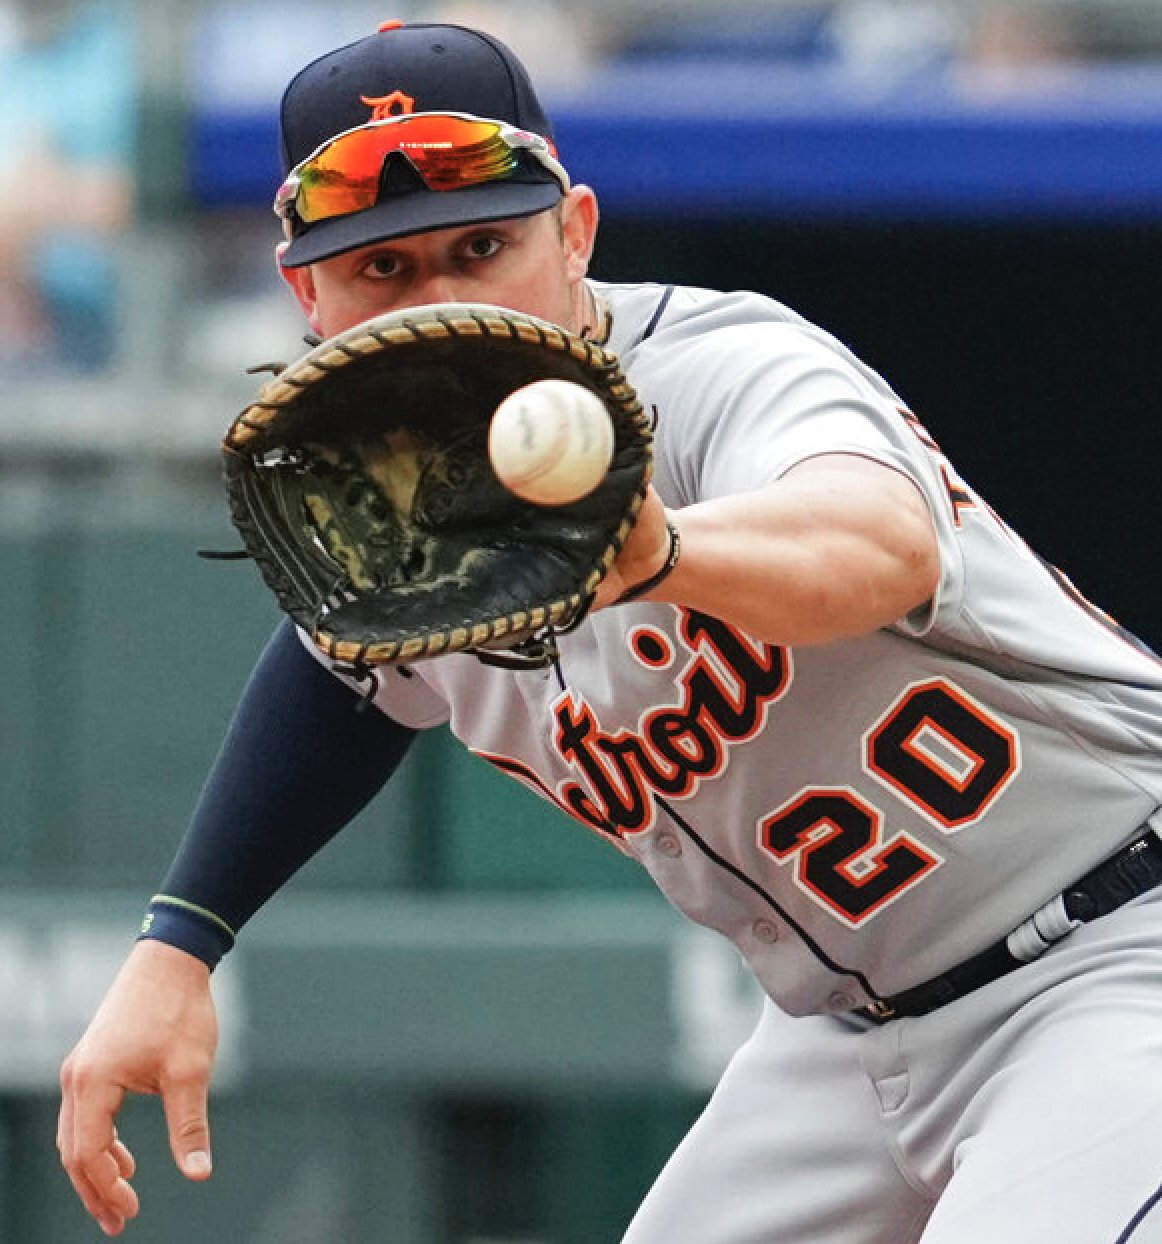 Tigers Today podcast: Talking Torkelson, plus Chris picks Opening Day roster